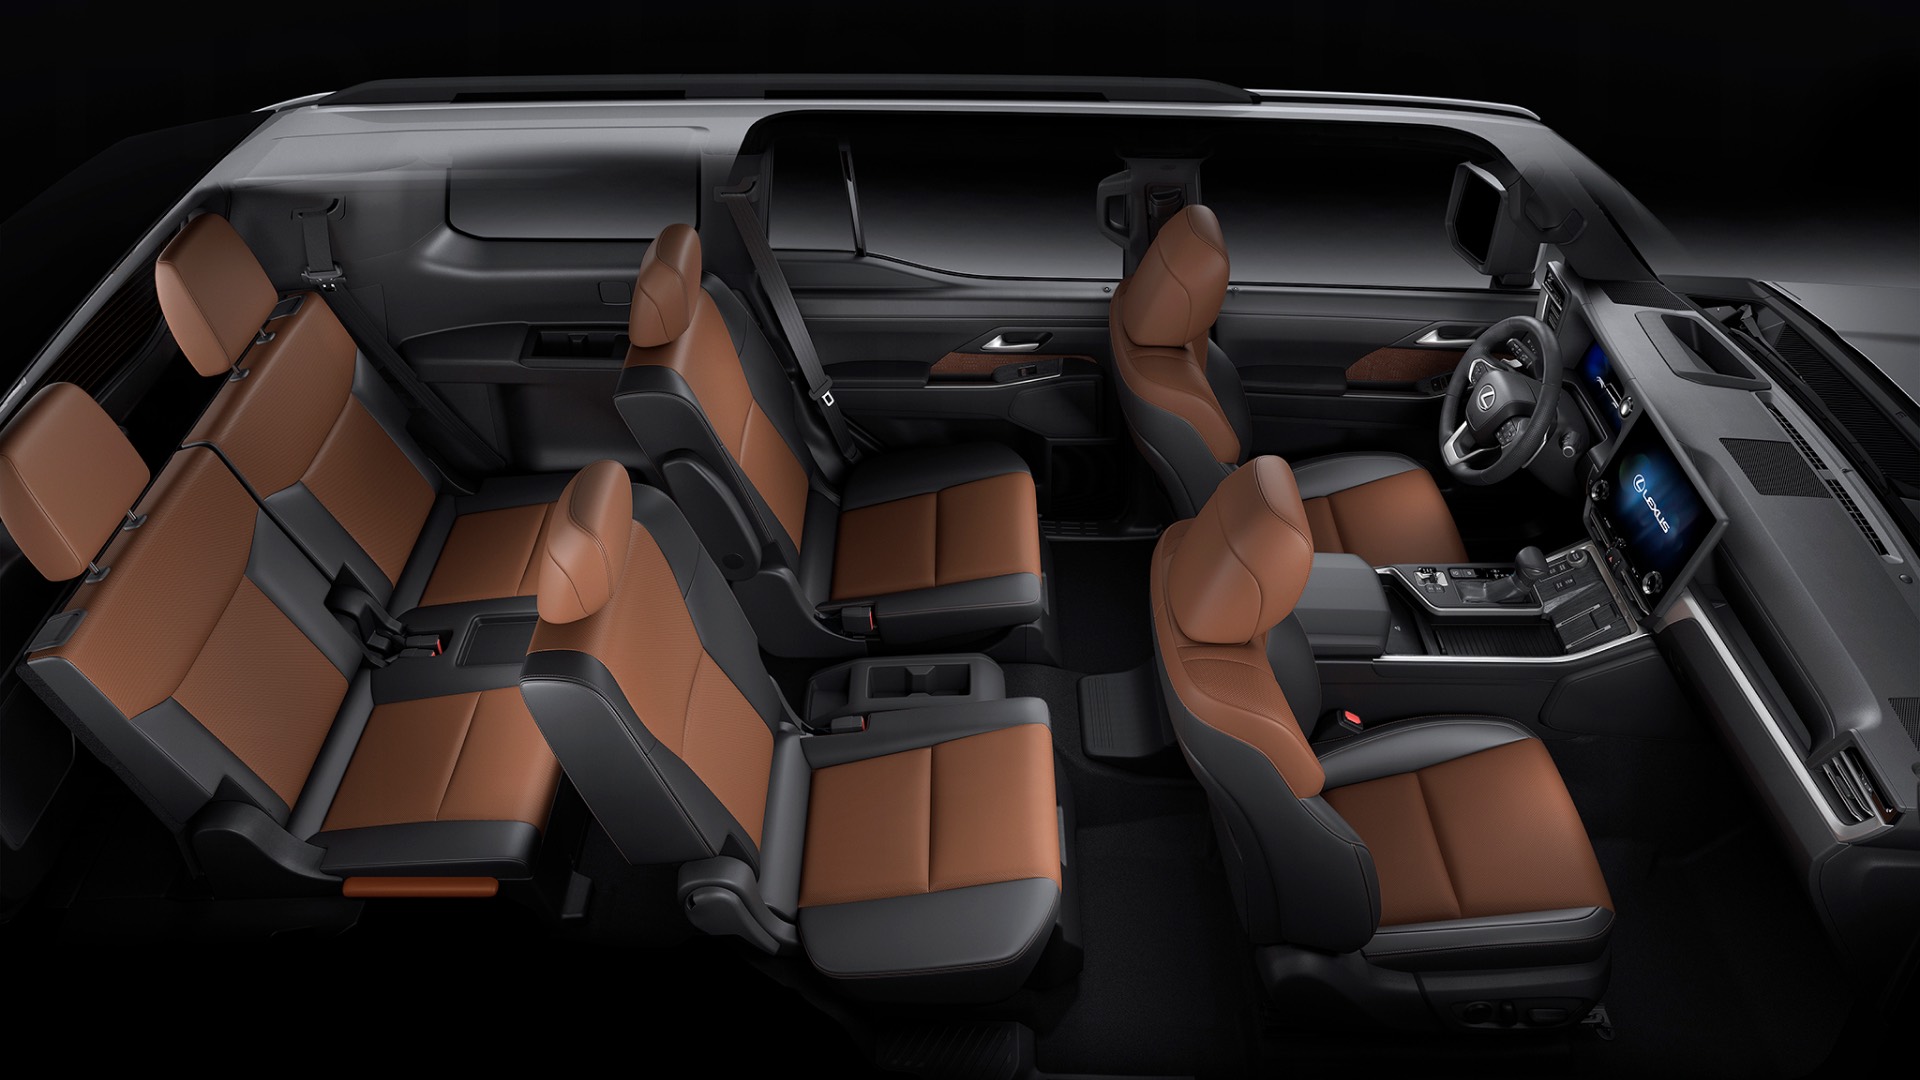 A rear view through the interior space of the Lexus GX - the back seats are folded so you can see all the way through to the back of the driver and passenger seats.